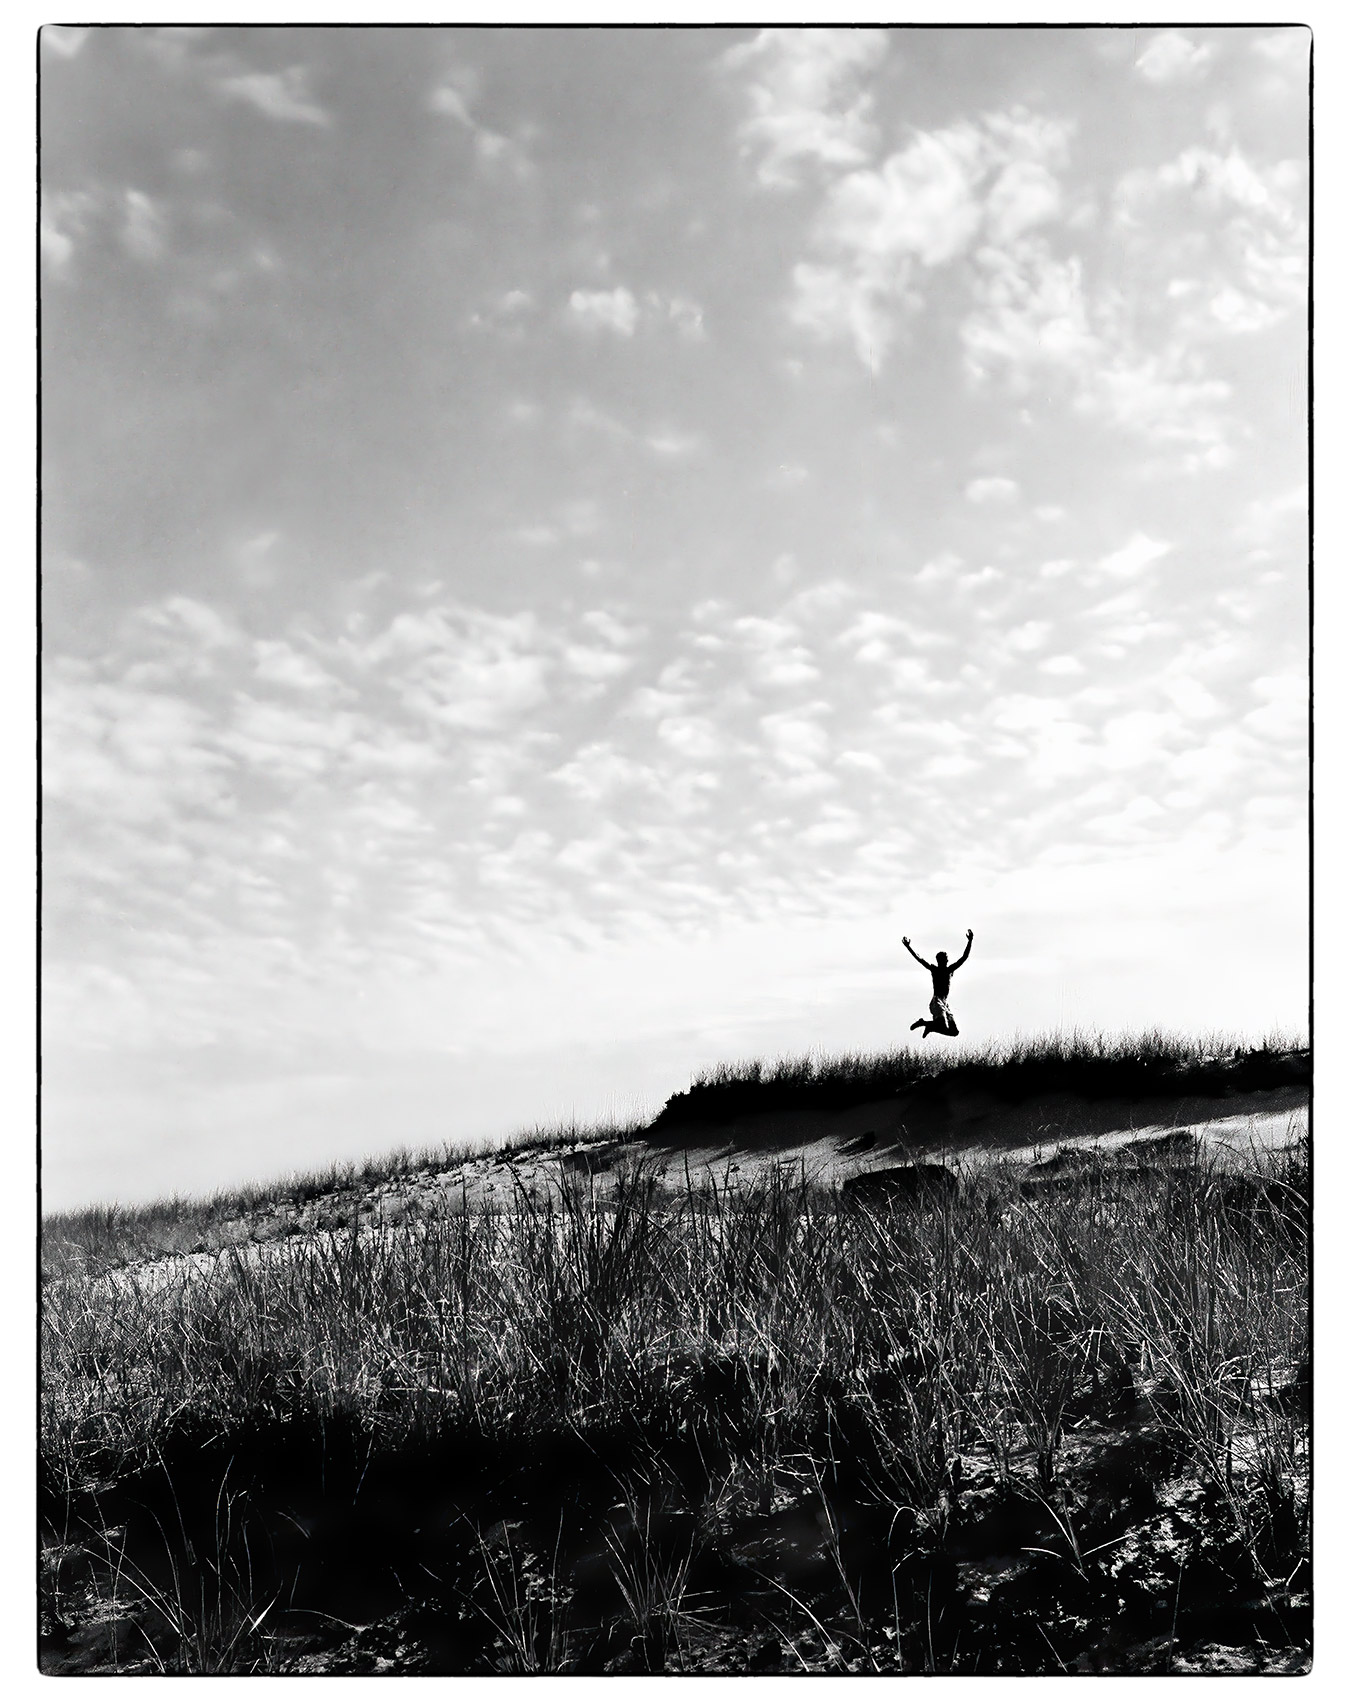 a-young-man-is-silhouetted-against-the-sky-as-he-jumps-off-a-sand-dune-in-provincetown-massachusetts